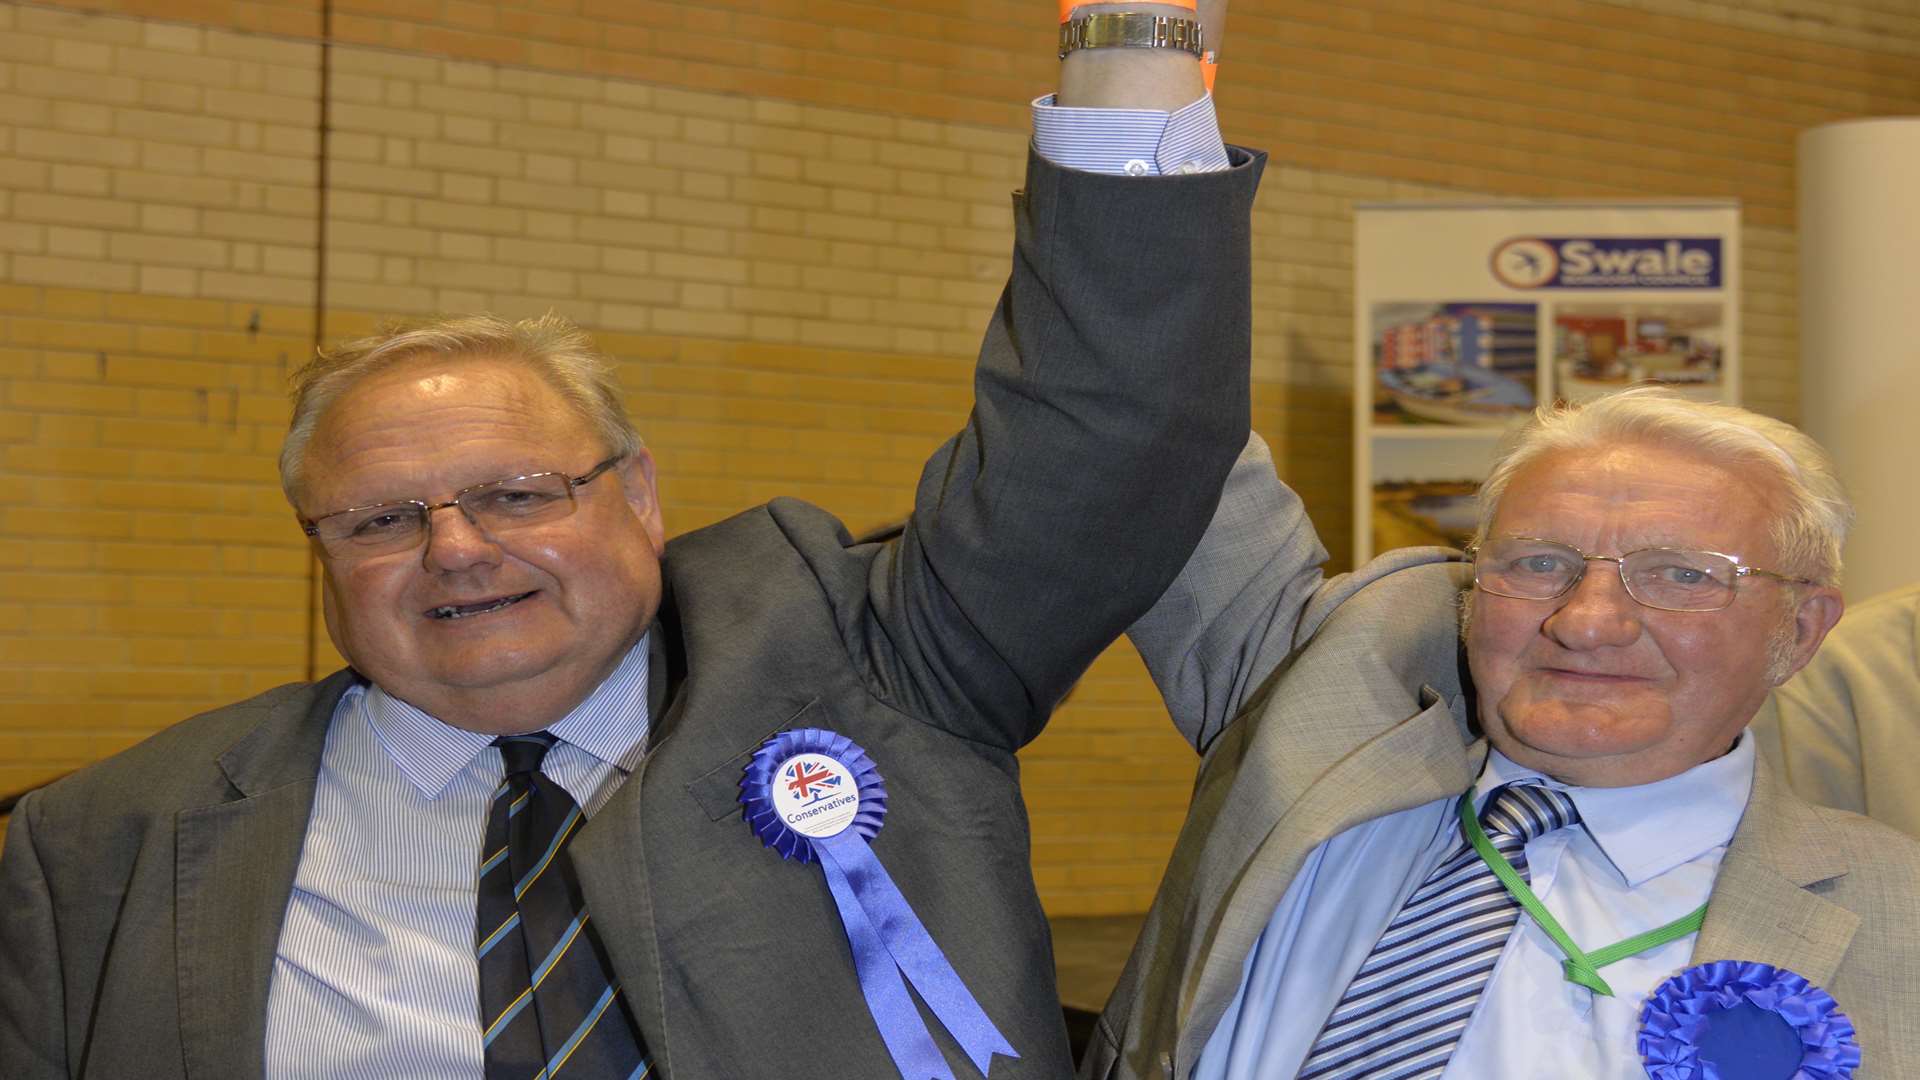 Andrew Bowles and George Bobbin celebrate their win on Boughton and Courtenay ward.